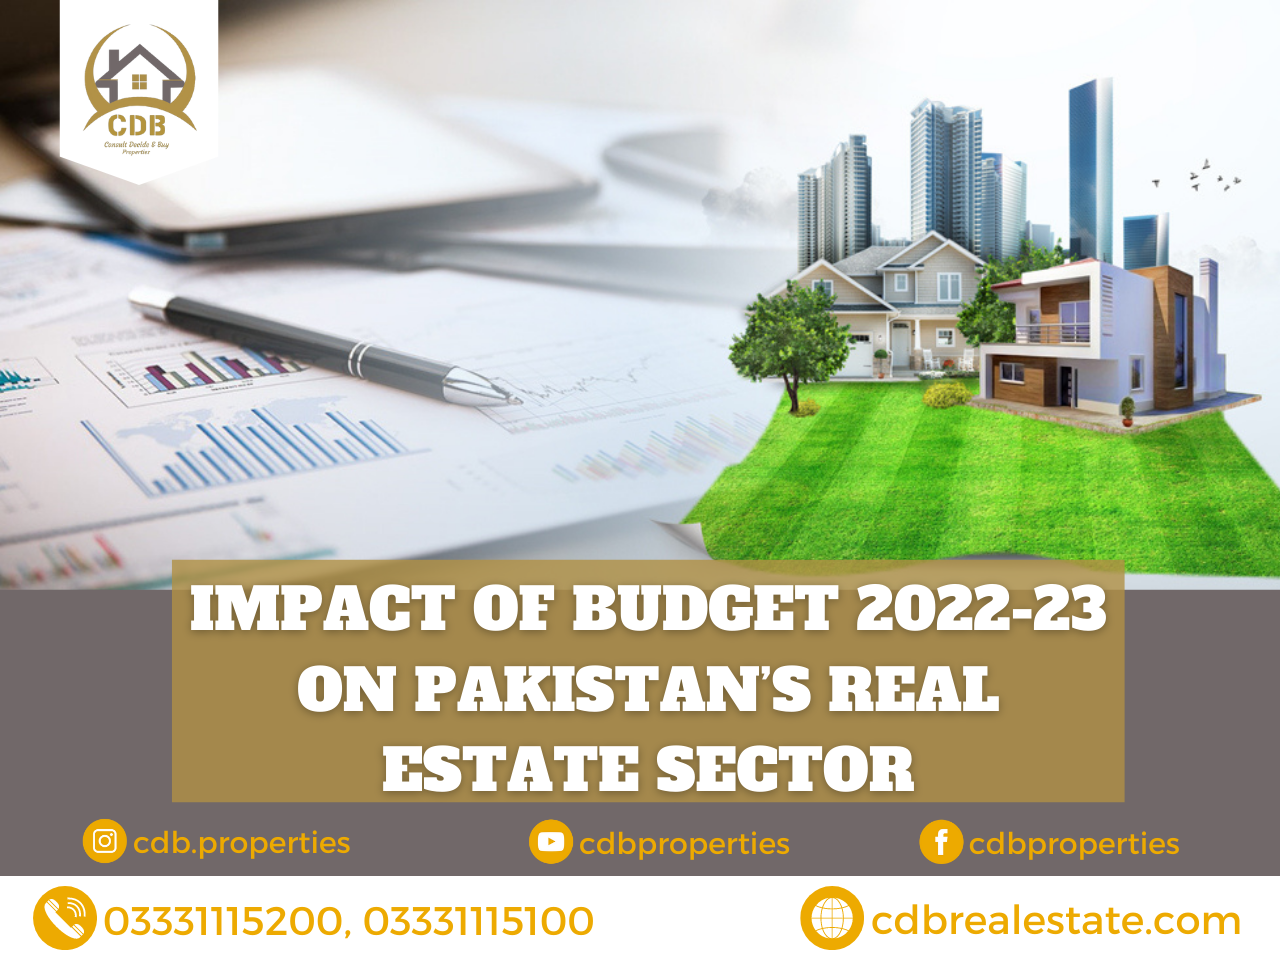 Impact of Budget 2022-23 On Pakistan’s Real Estate Sector